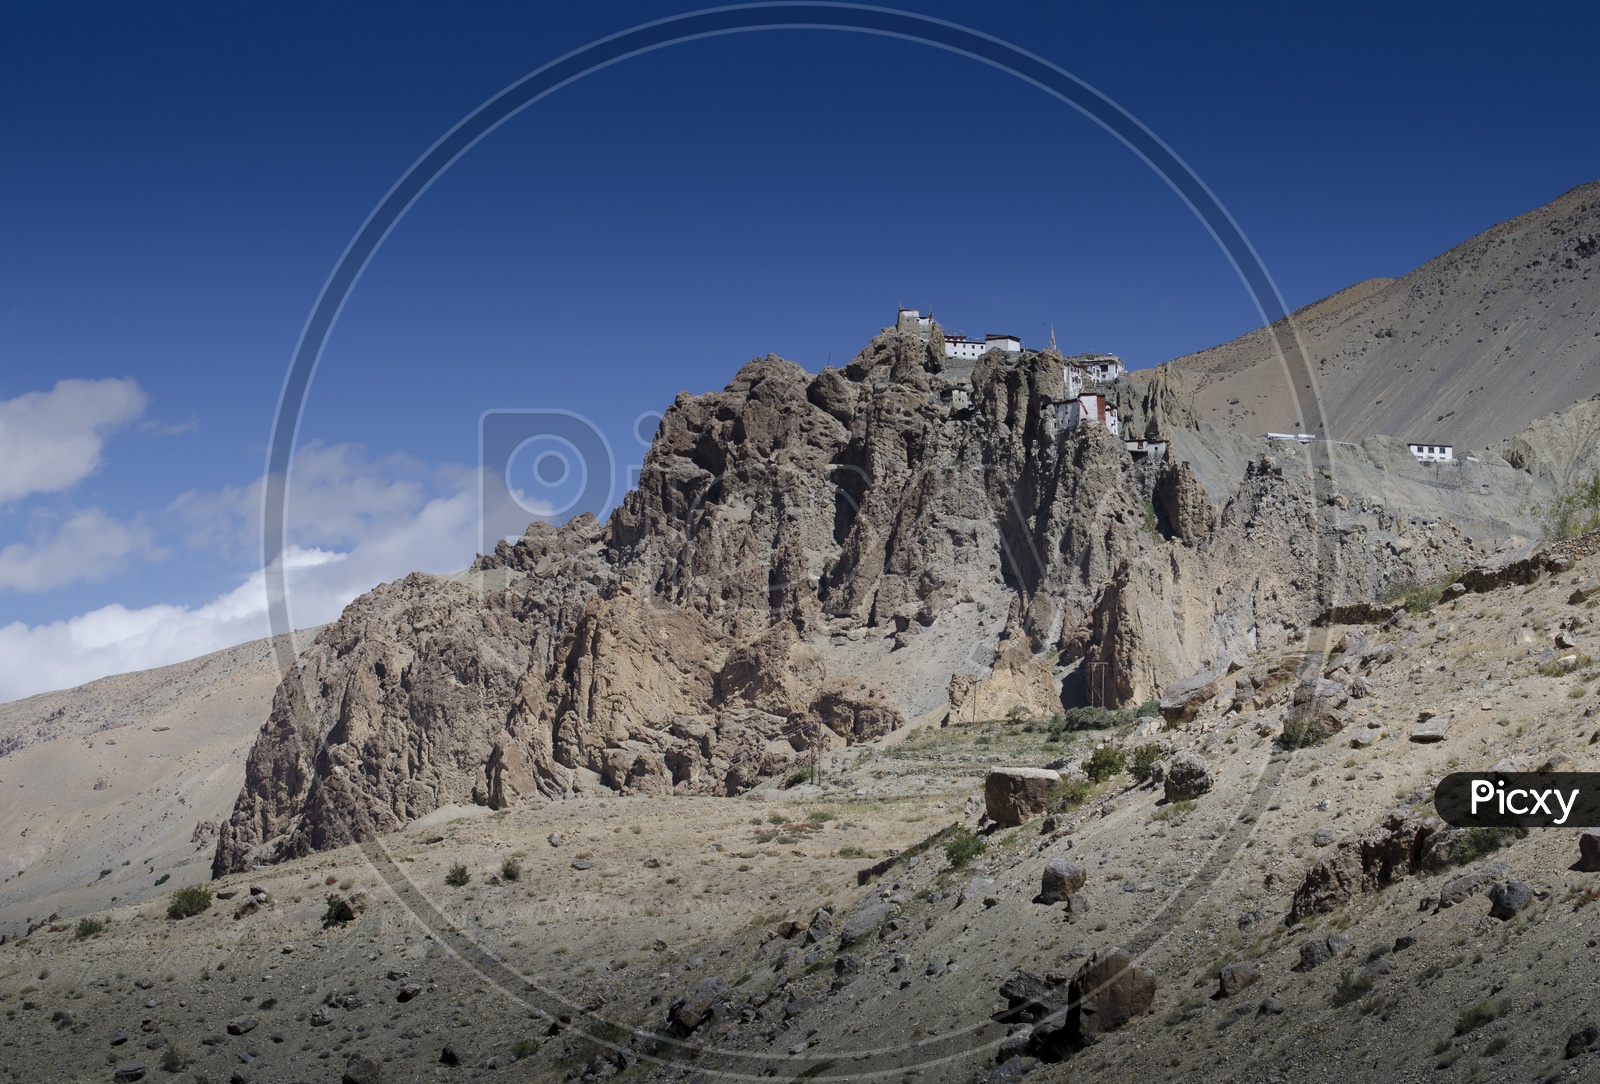 The view of Dhankar monastery over the craggy mountain